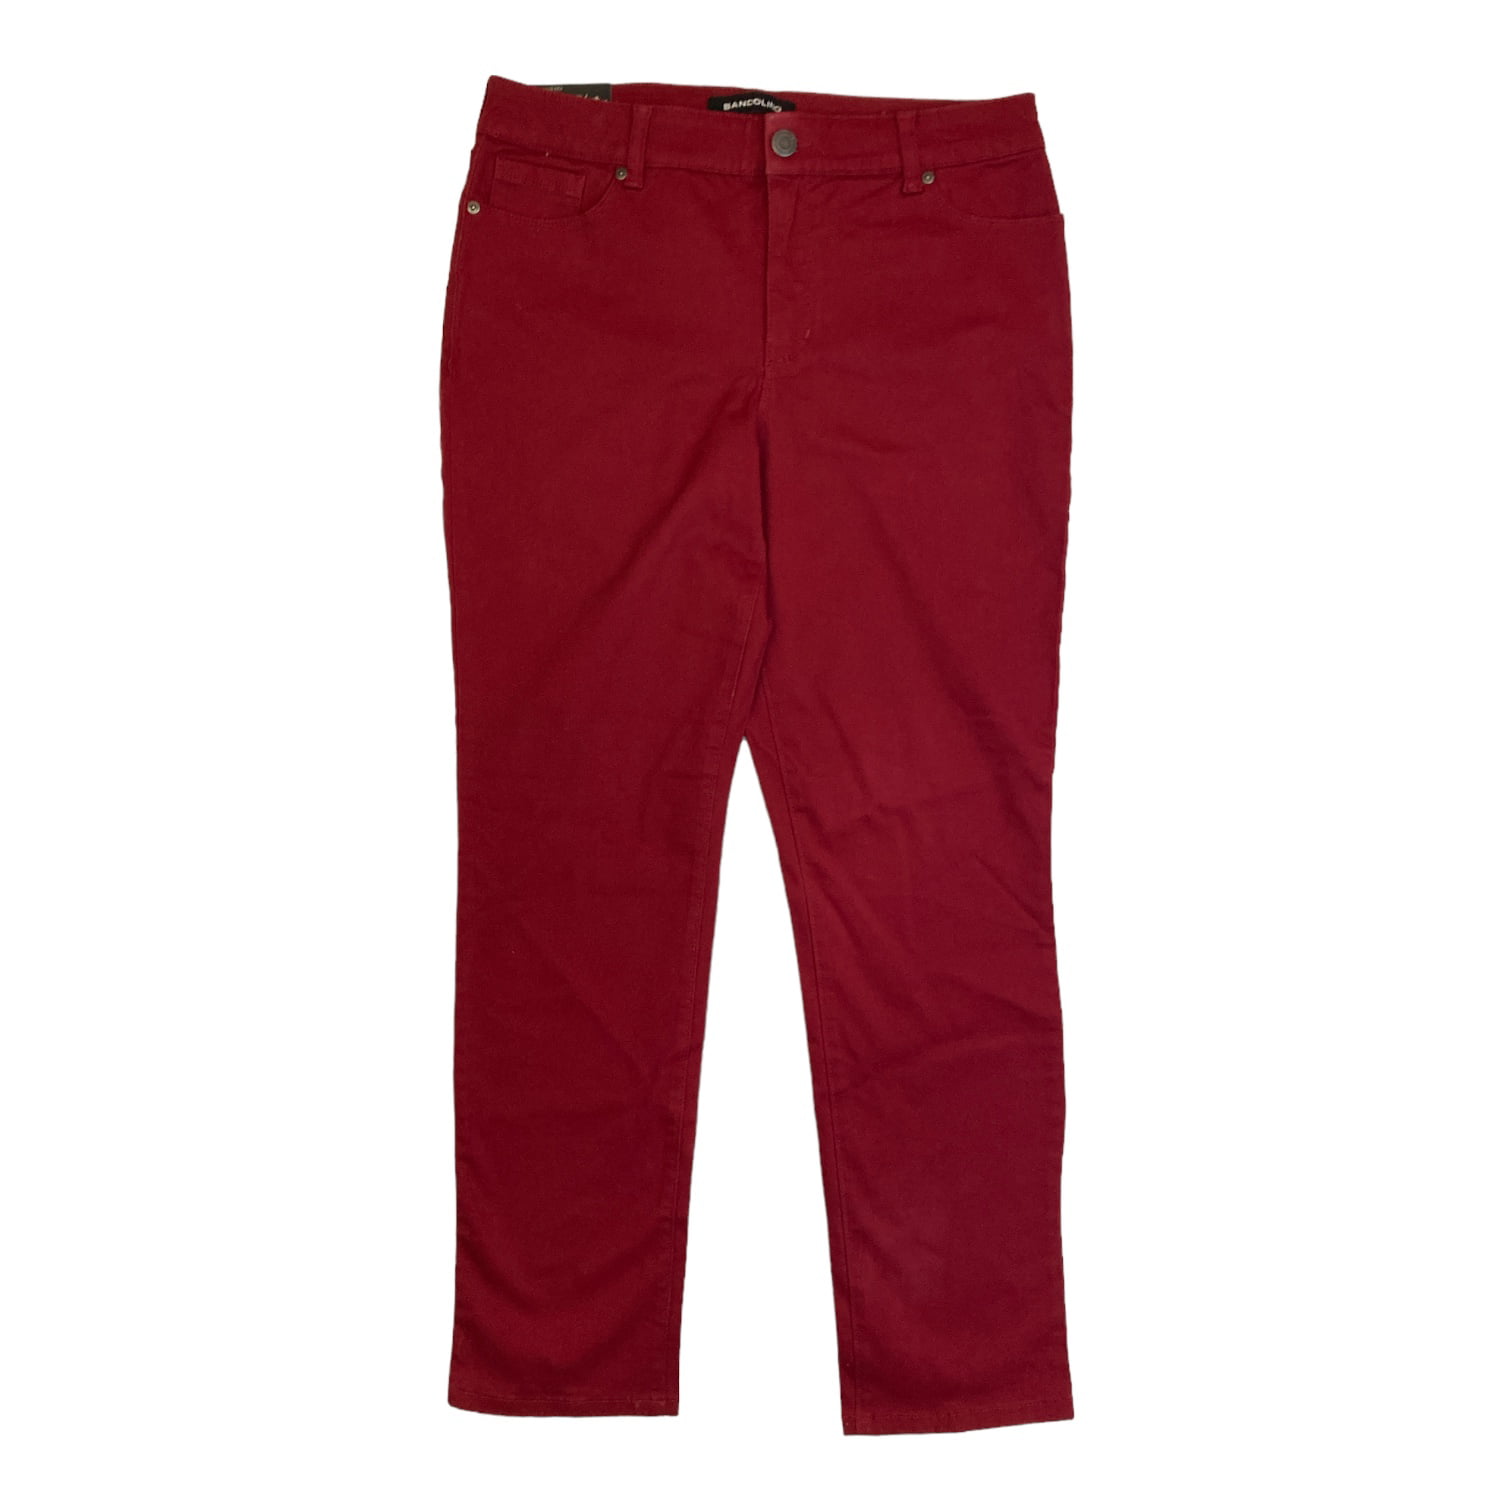 Pilbara Ladies Cotton Stretch Jeans - Buy Online with Red Roo